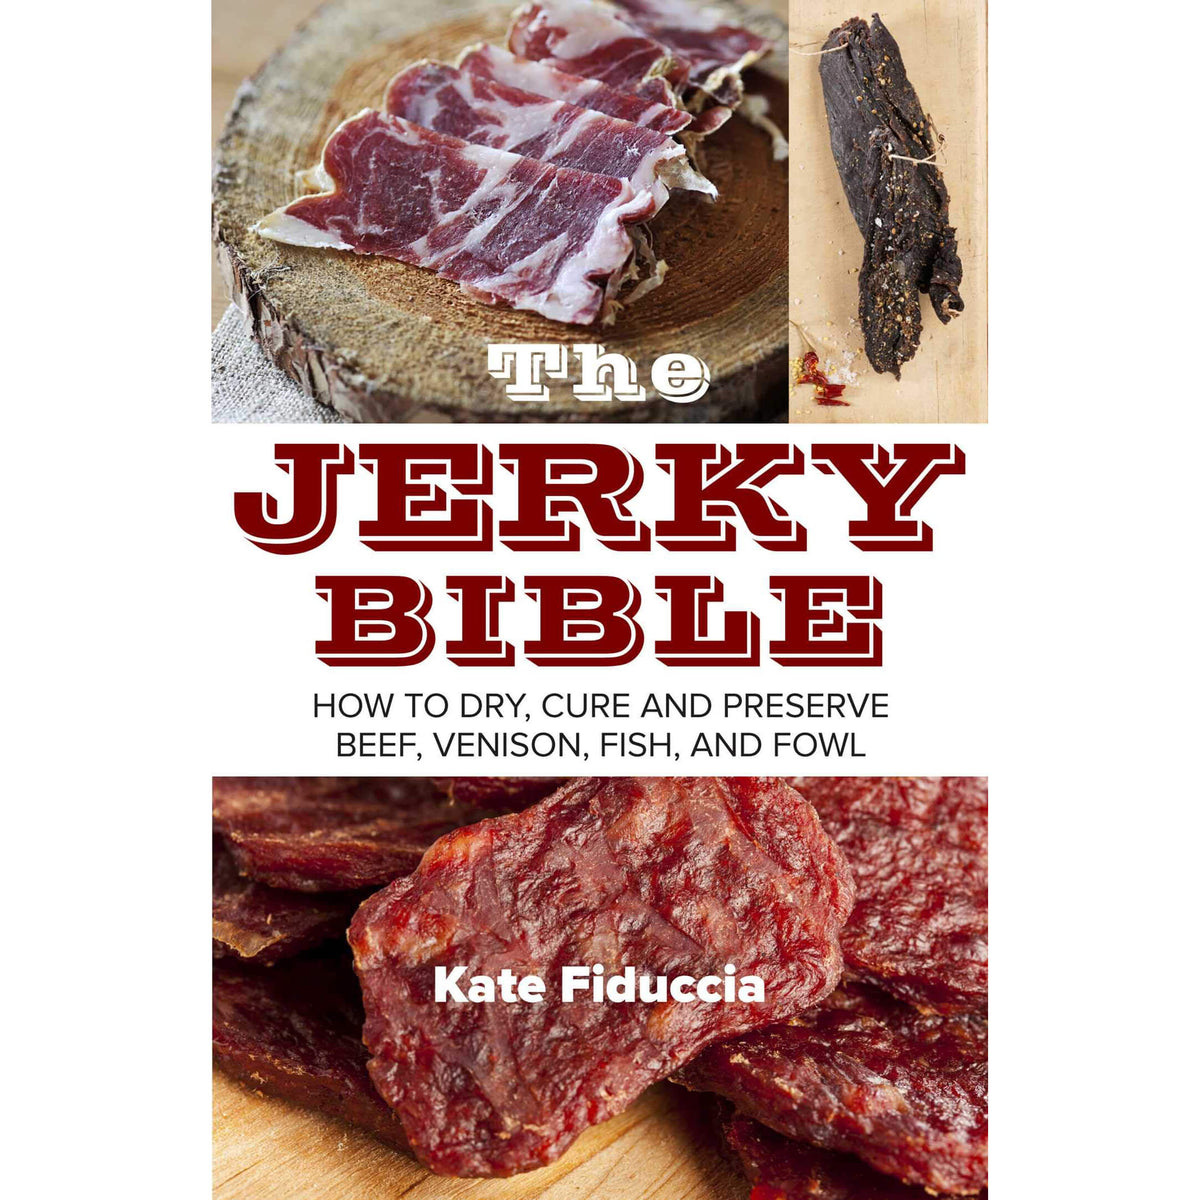 The Jerky Bible front cover.